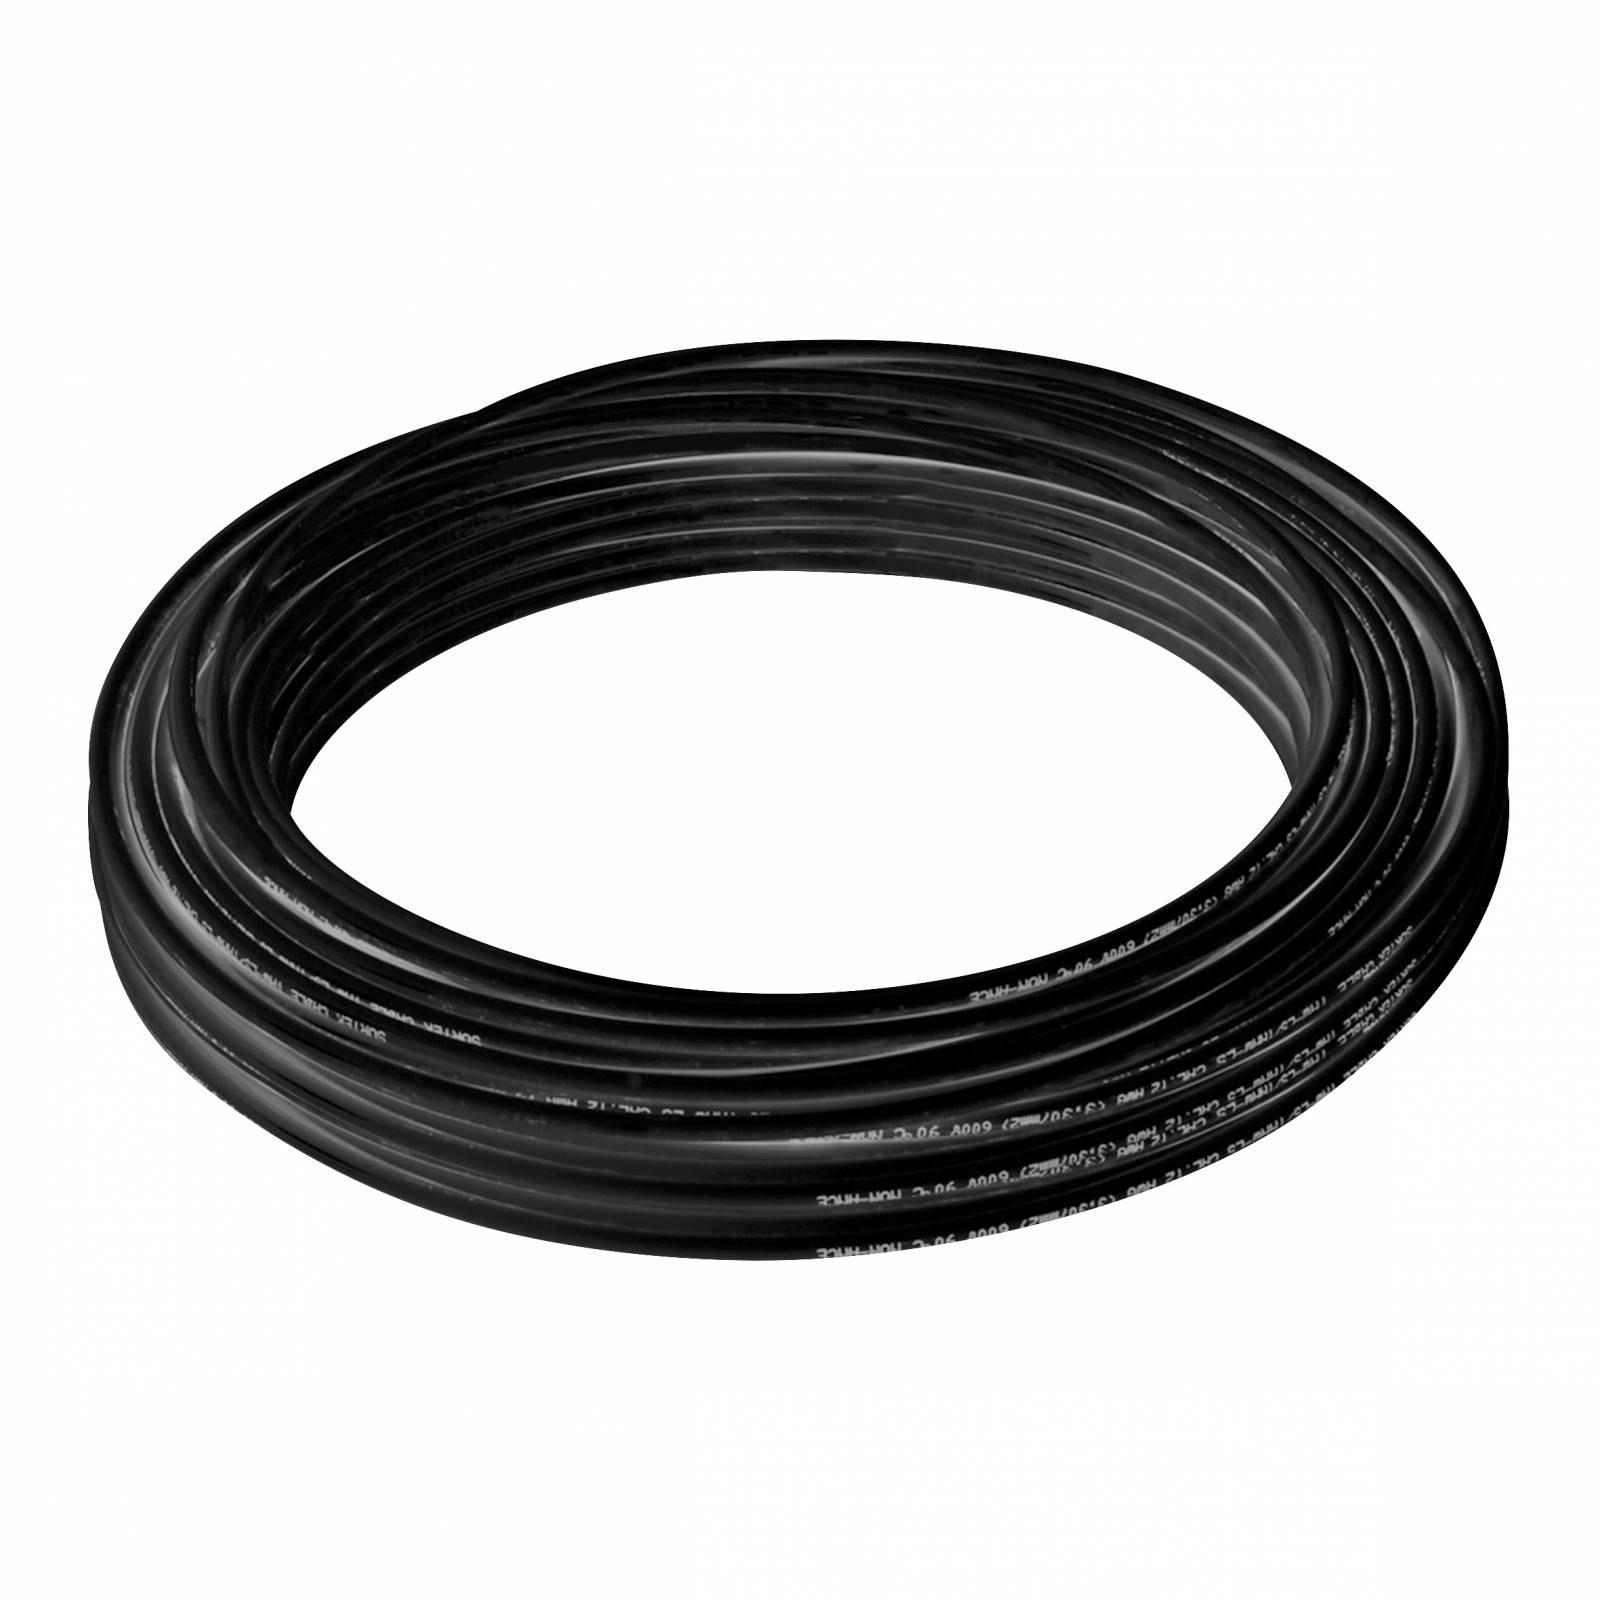 Cable Eléctrico Tipo Thw-ls/thhw-ls Cal.14 100m Negro 136922 